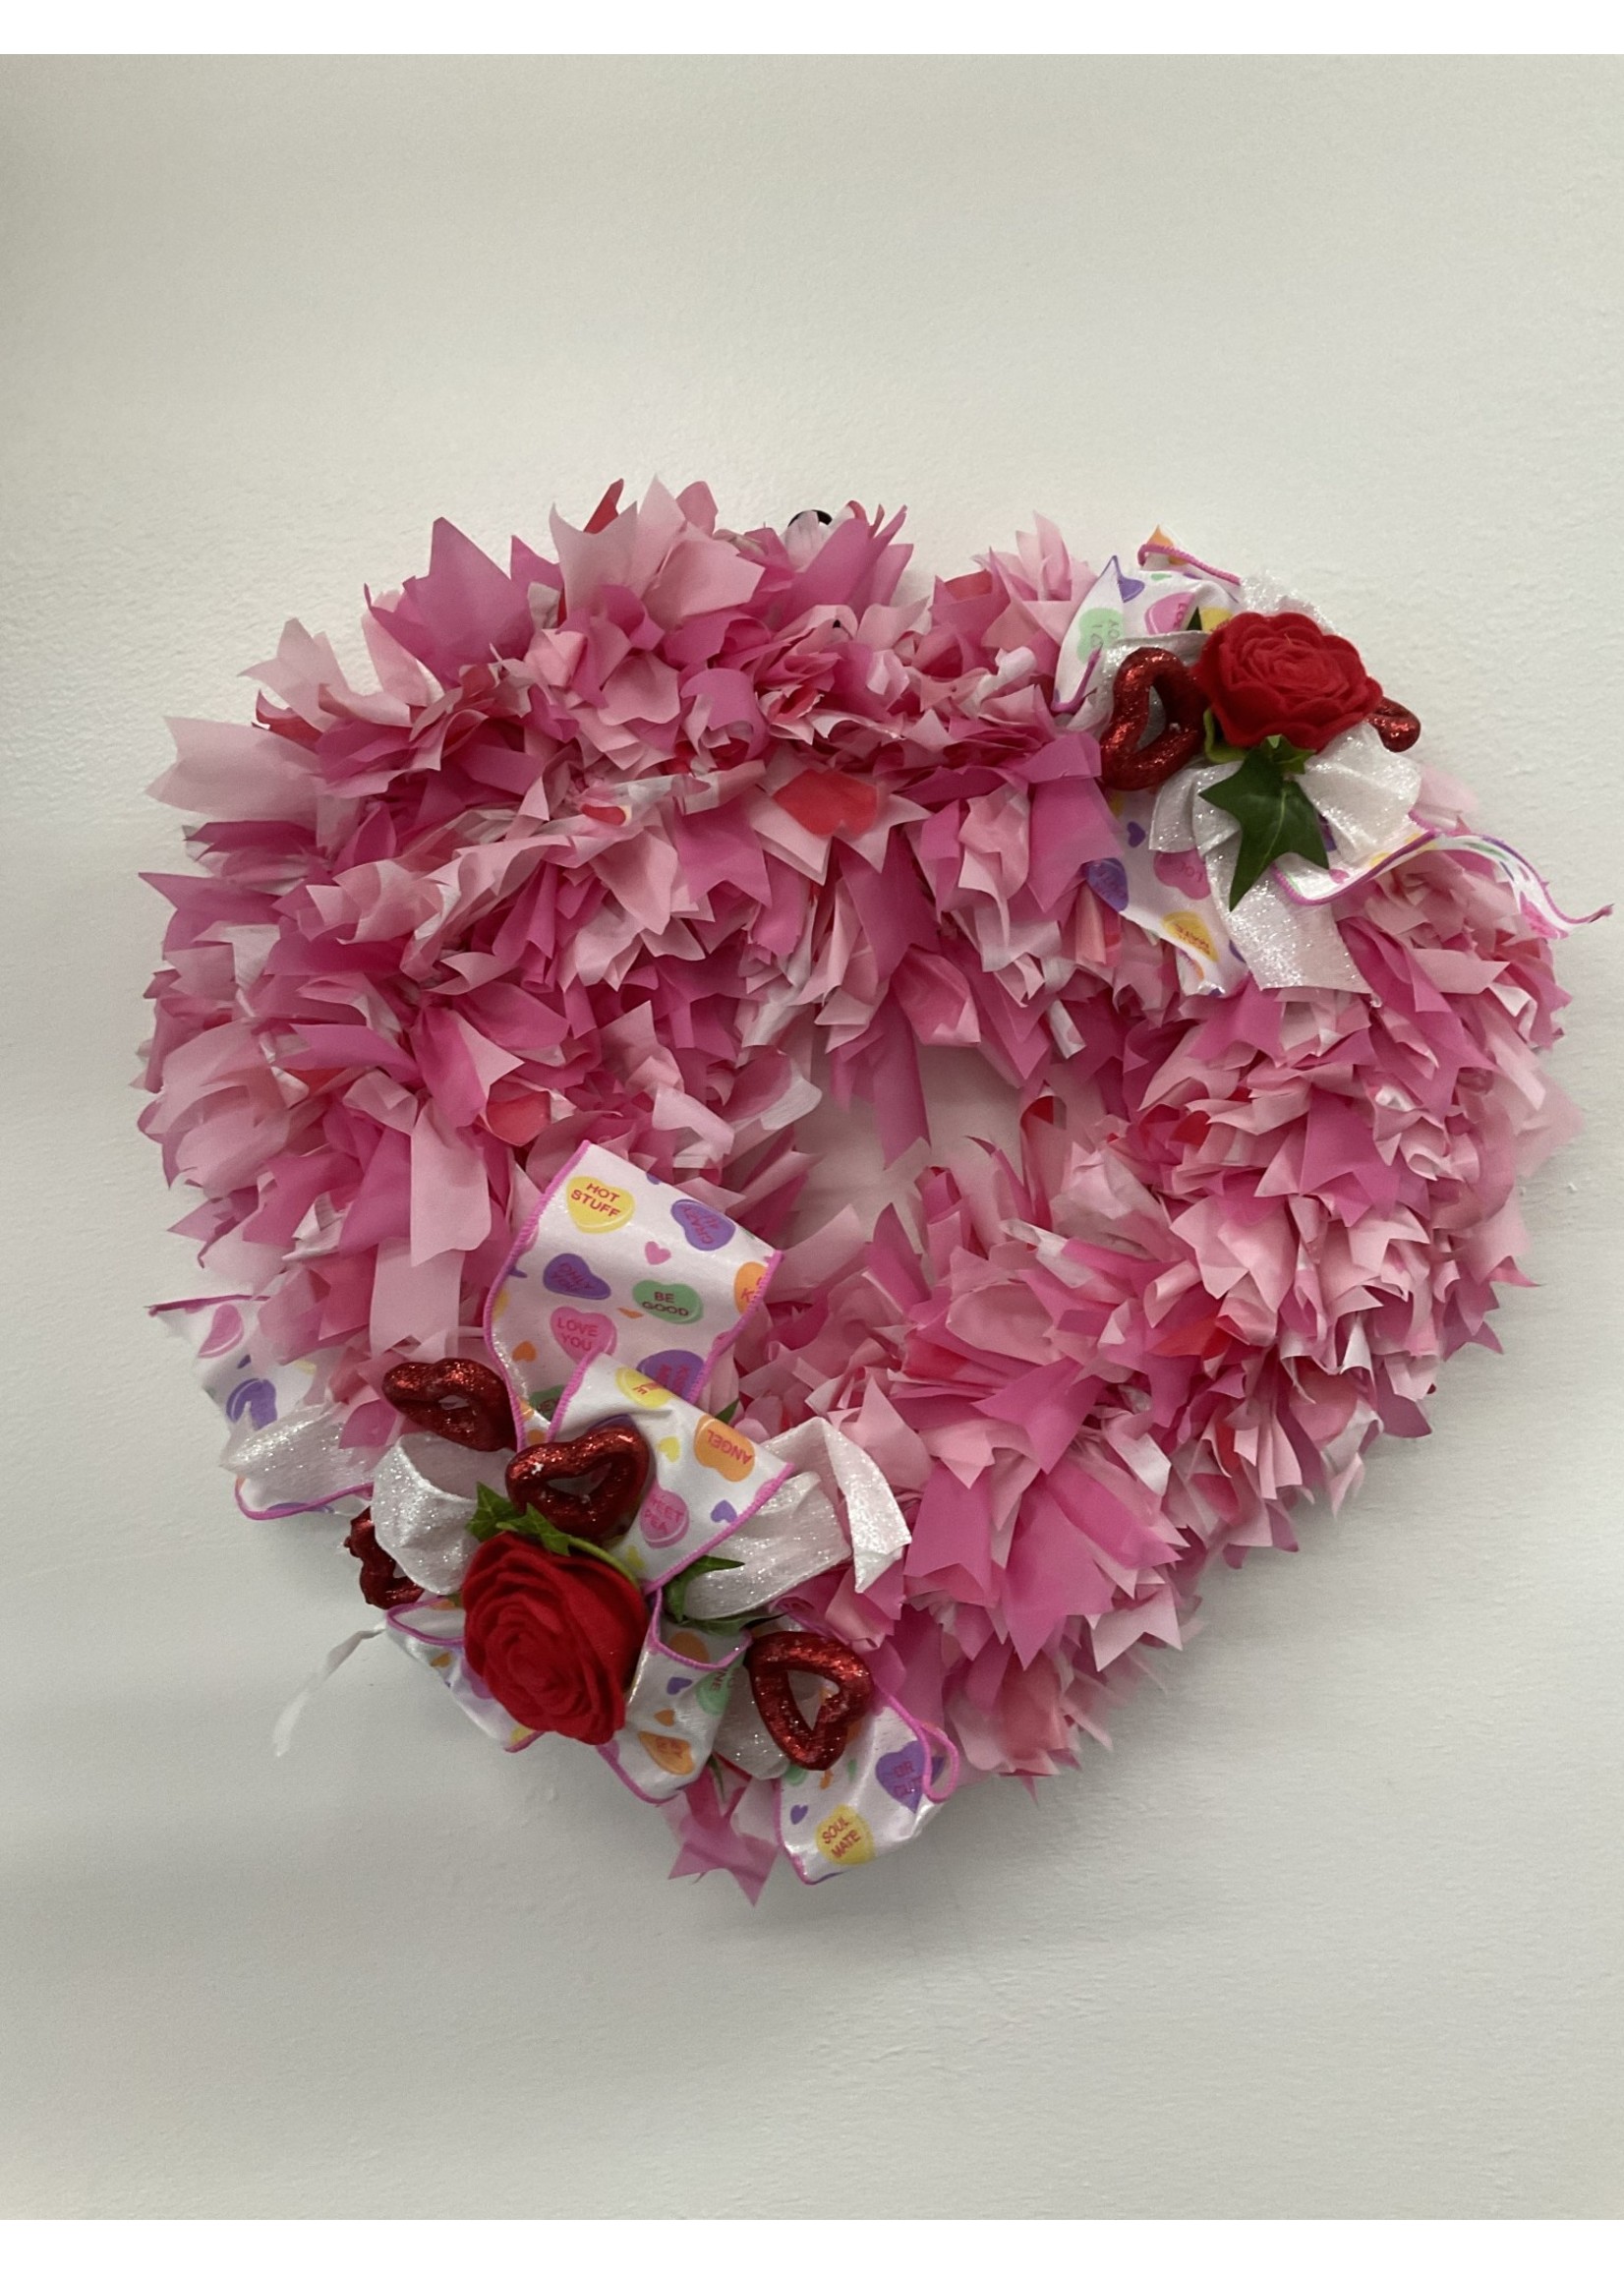 My New Favorite Thing Wreath Heart made from Pink Plastic Tablecloth with Red Hearts and Roses and Candy Ribbon